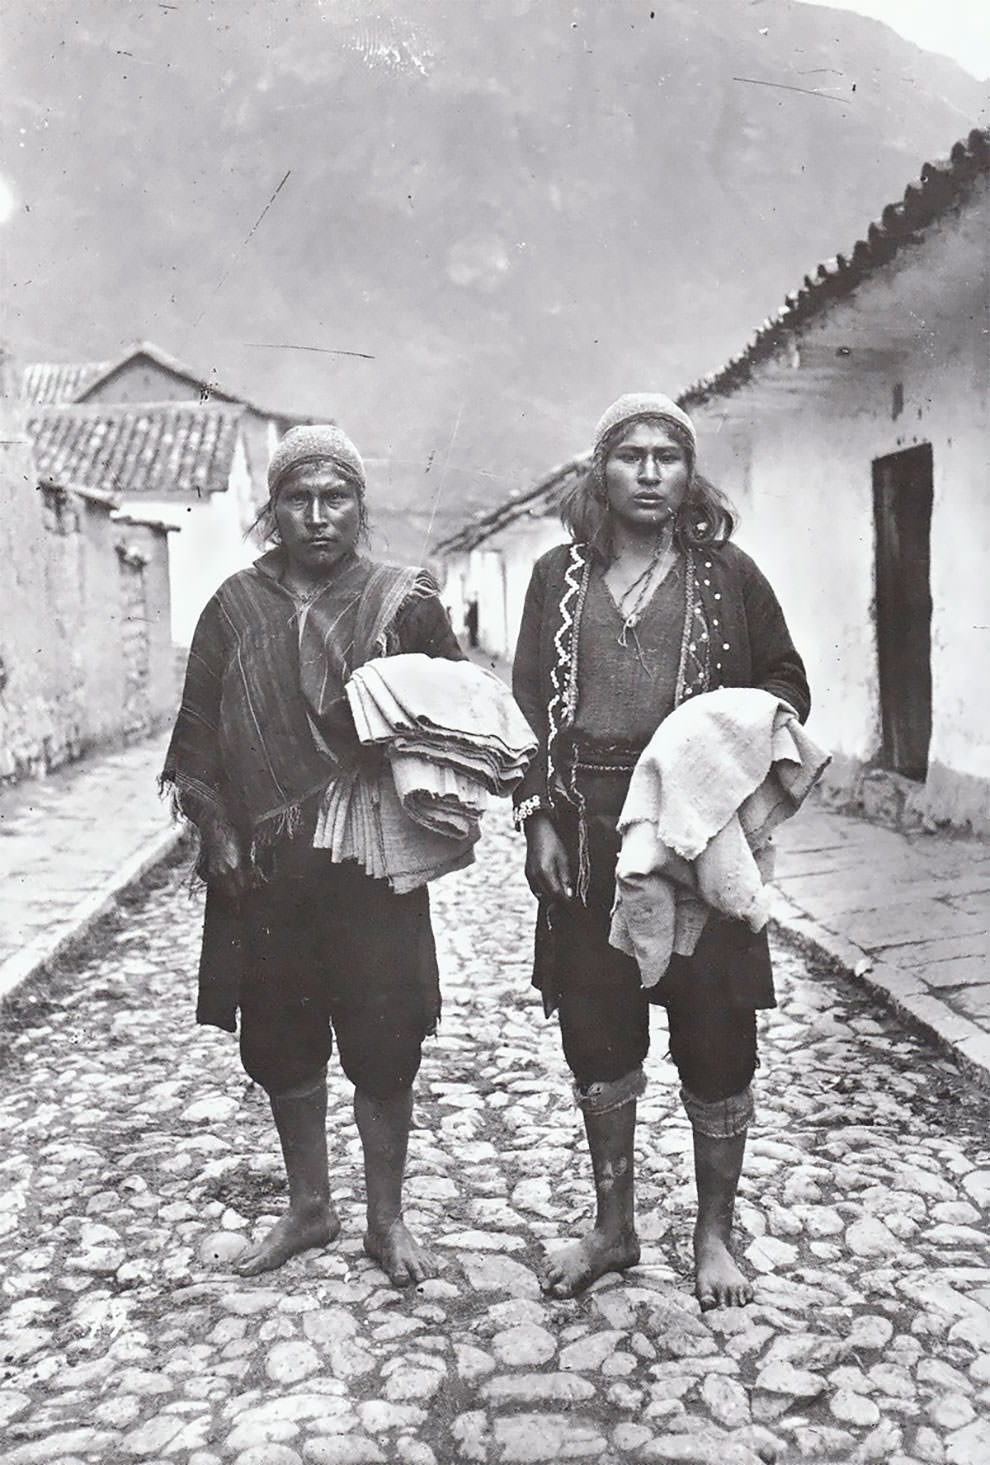 Fascinating Historical Photos Of Inca Culture And Life In Peruvian Andes From The Early 20th Century